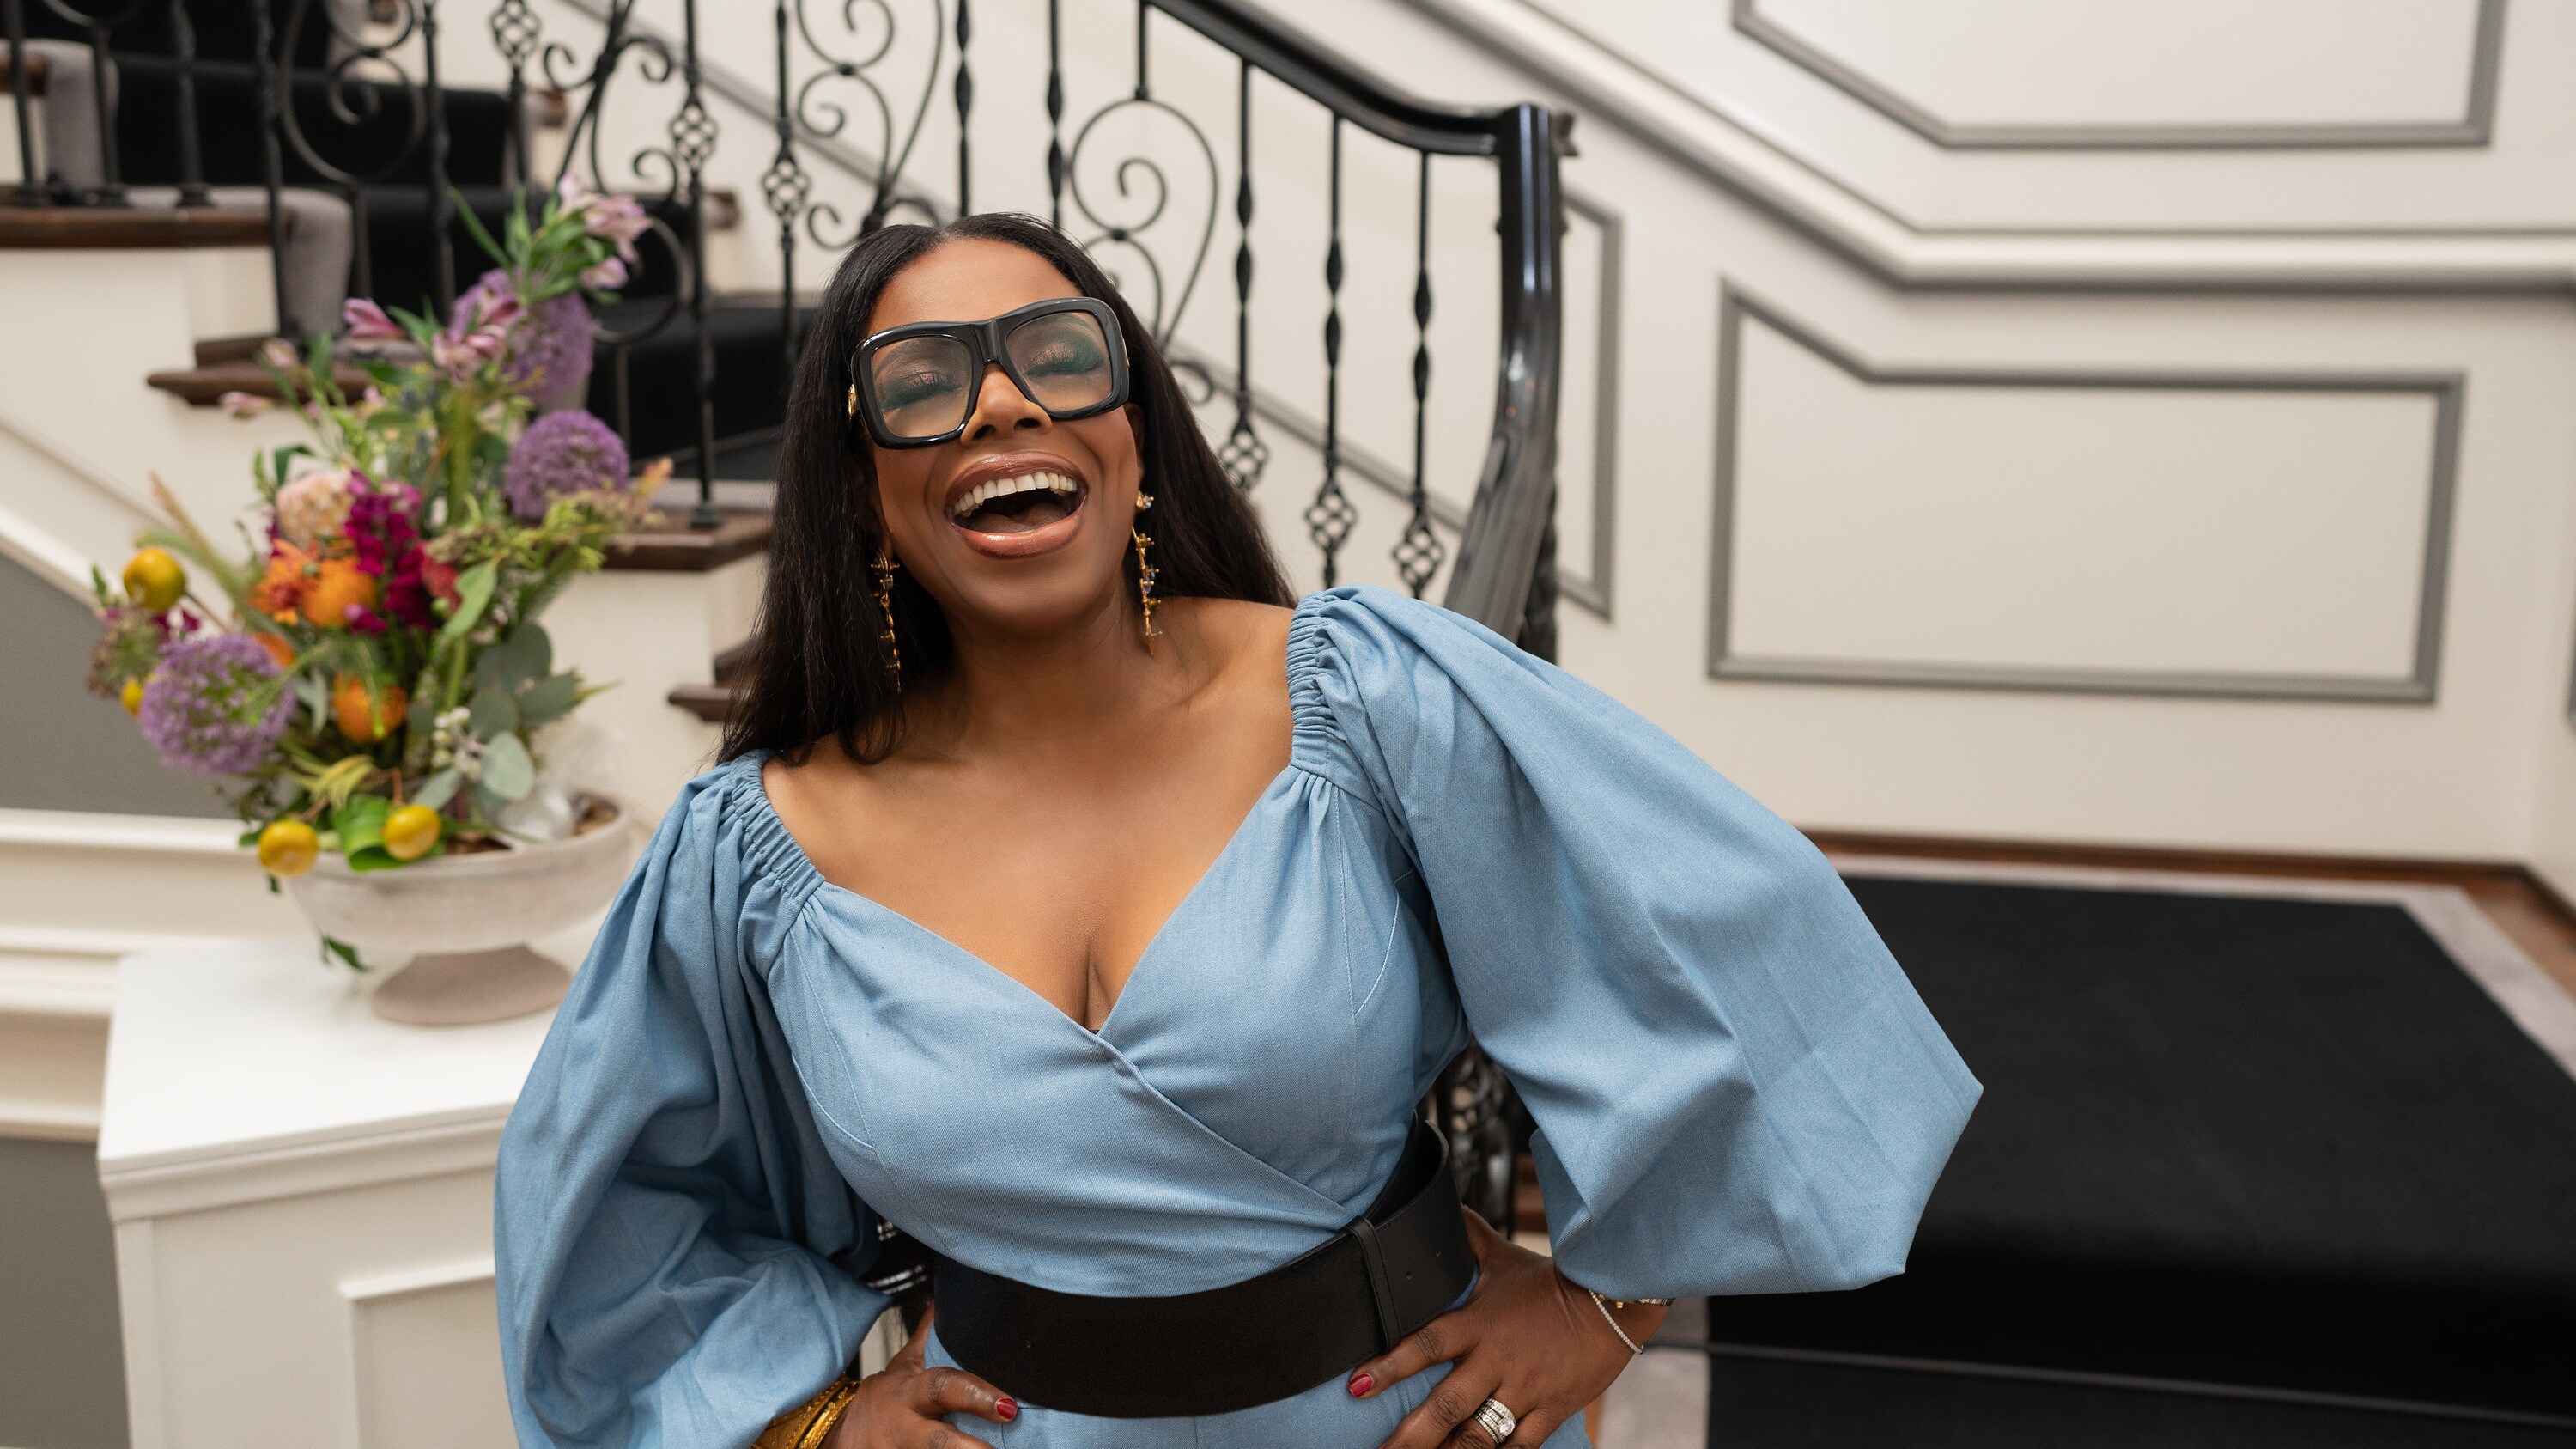 Sheryl Lee Ralph on Turning the Tables with Robin Roberts. In season 2 of Turning the Tables with Robin Roberts, Robin Roberts gets personal with a new group of Hollywood's iconic women as they bear witness to their incredible journeys on their path to purpose. (Disney/Ser Baffo)